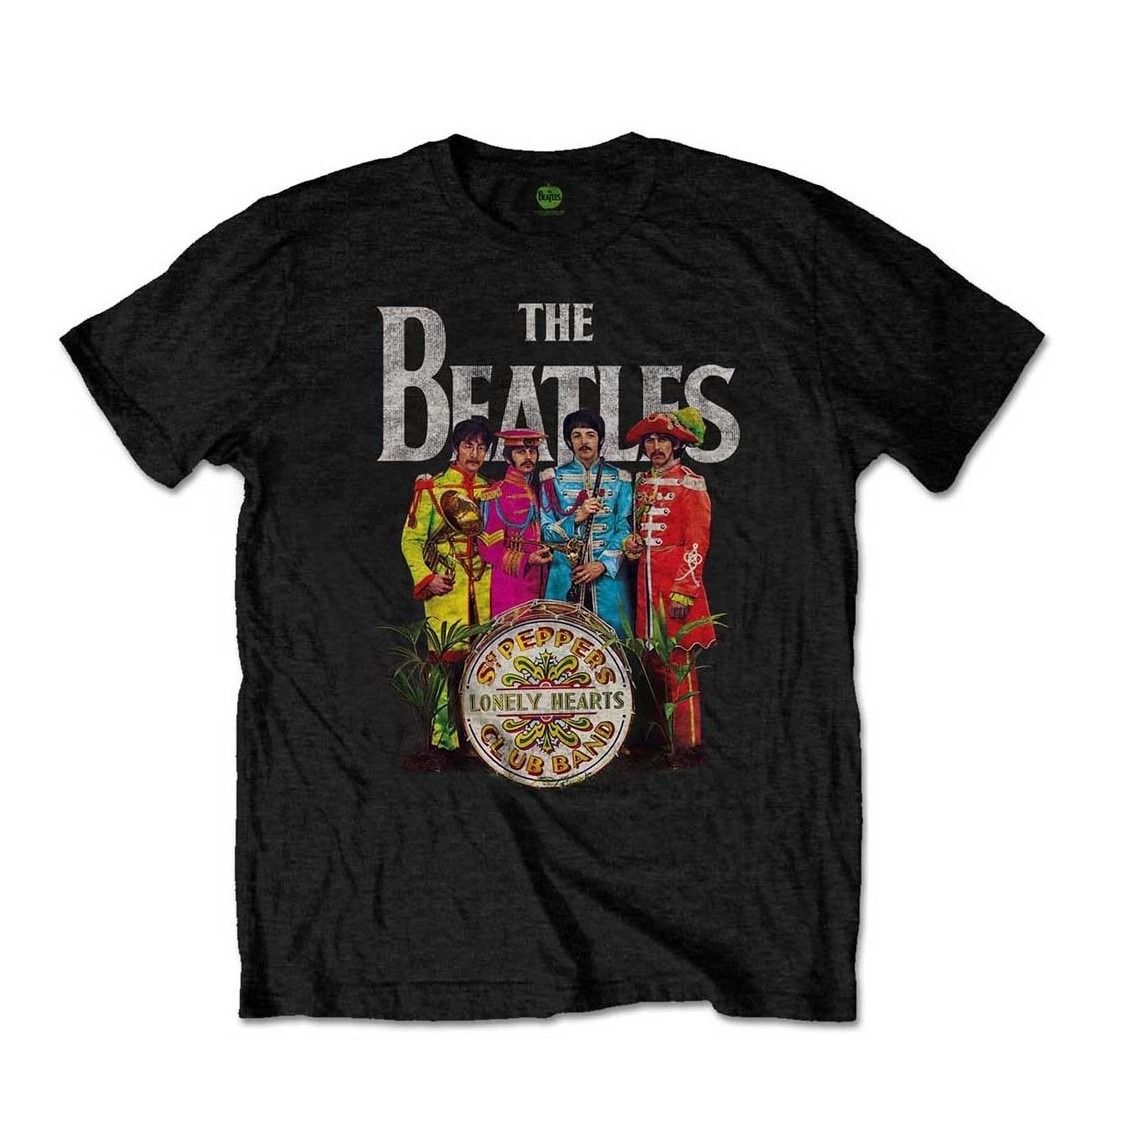 The Beatles - Sgt Pepper (Large)